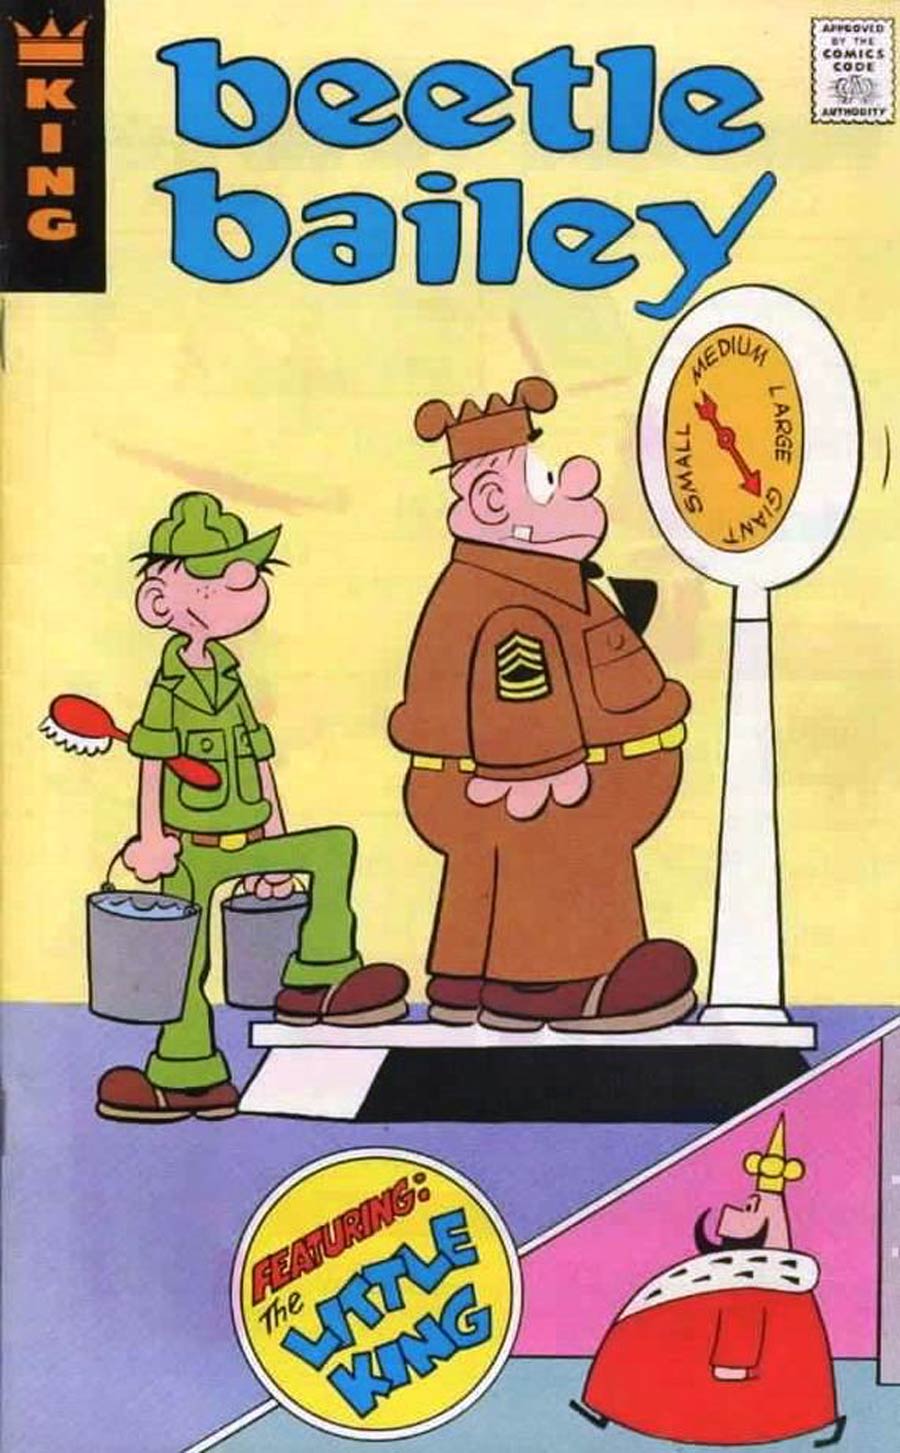 Comics Reading Libraries (R-13) #13 Beetle Bailey Little King